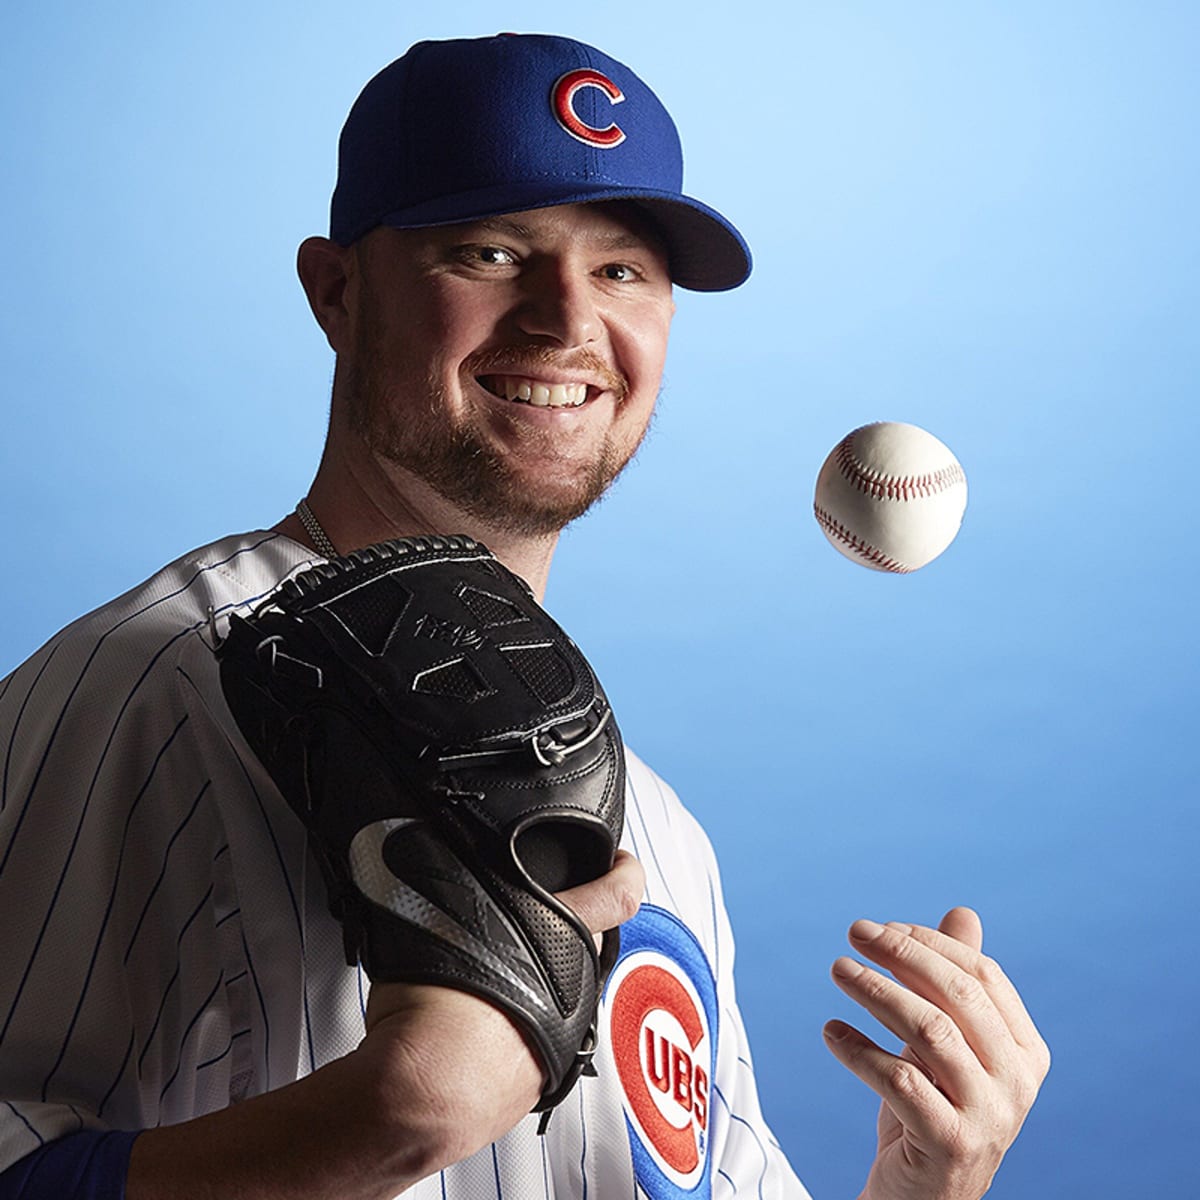 Jon Lester was an amazing person to have on the Chicago Cubs